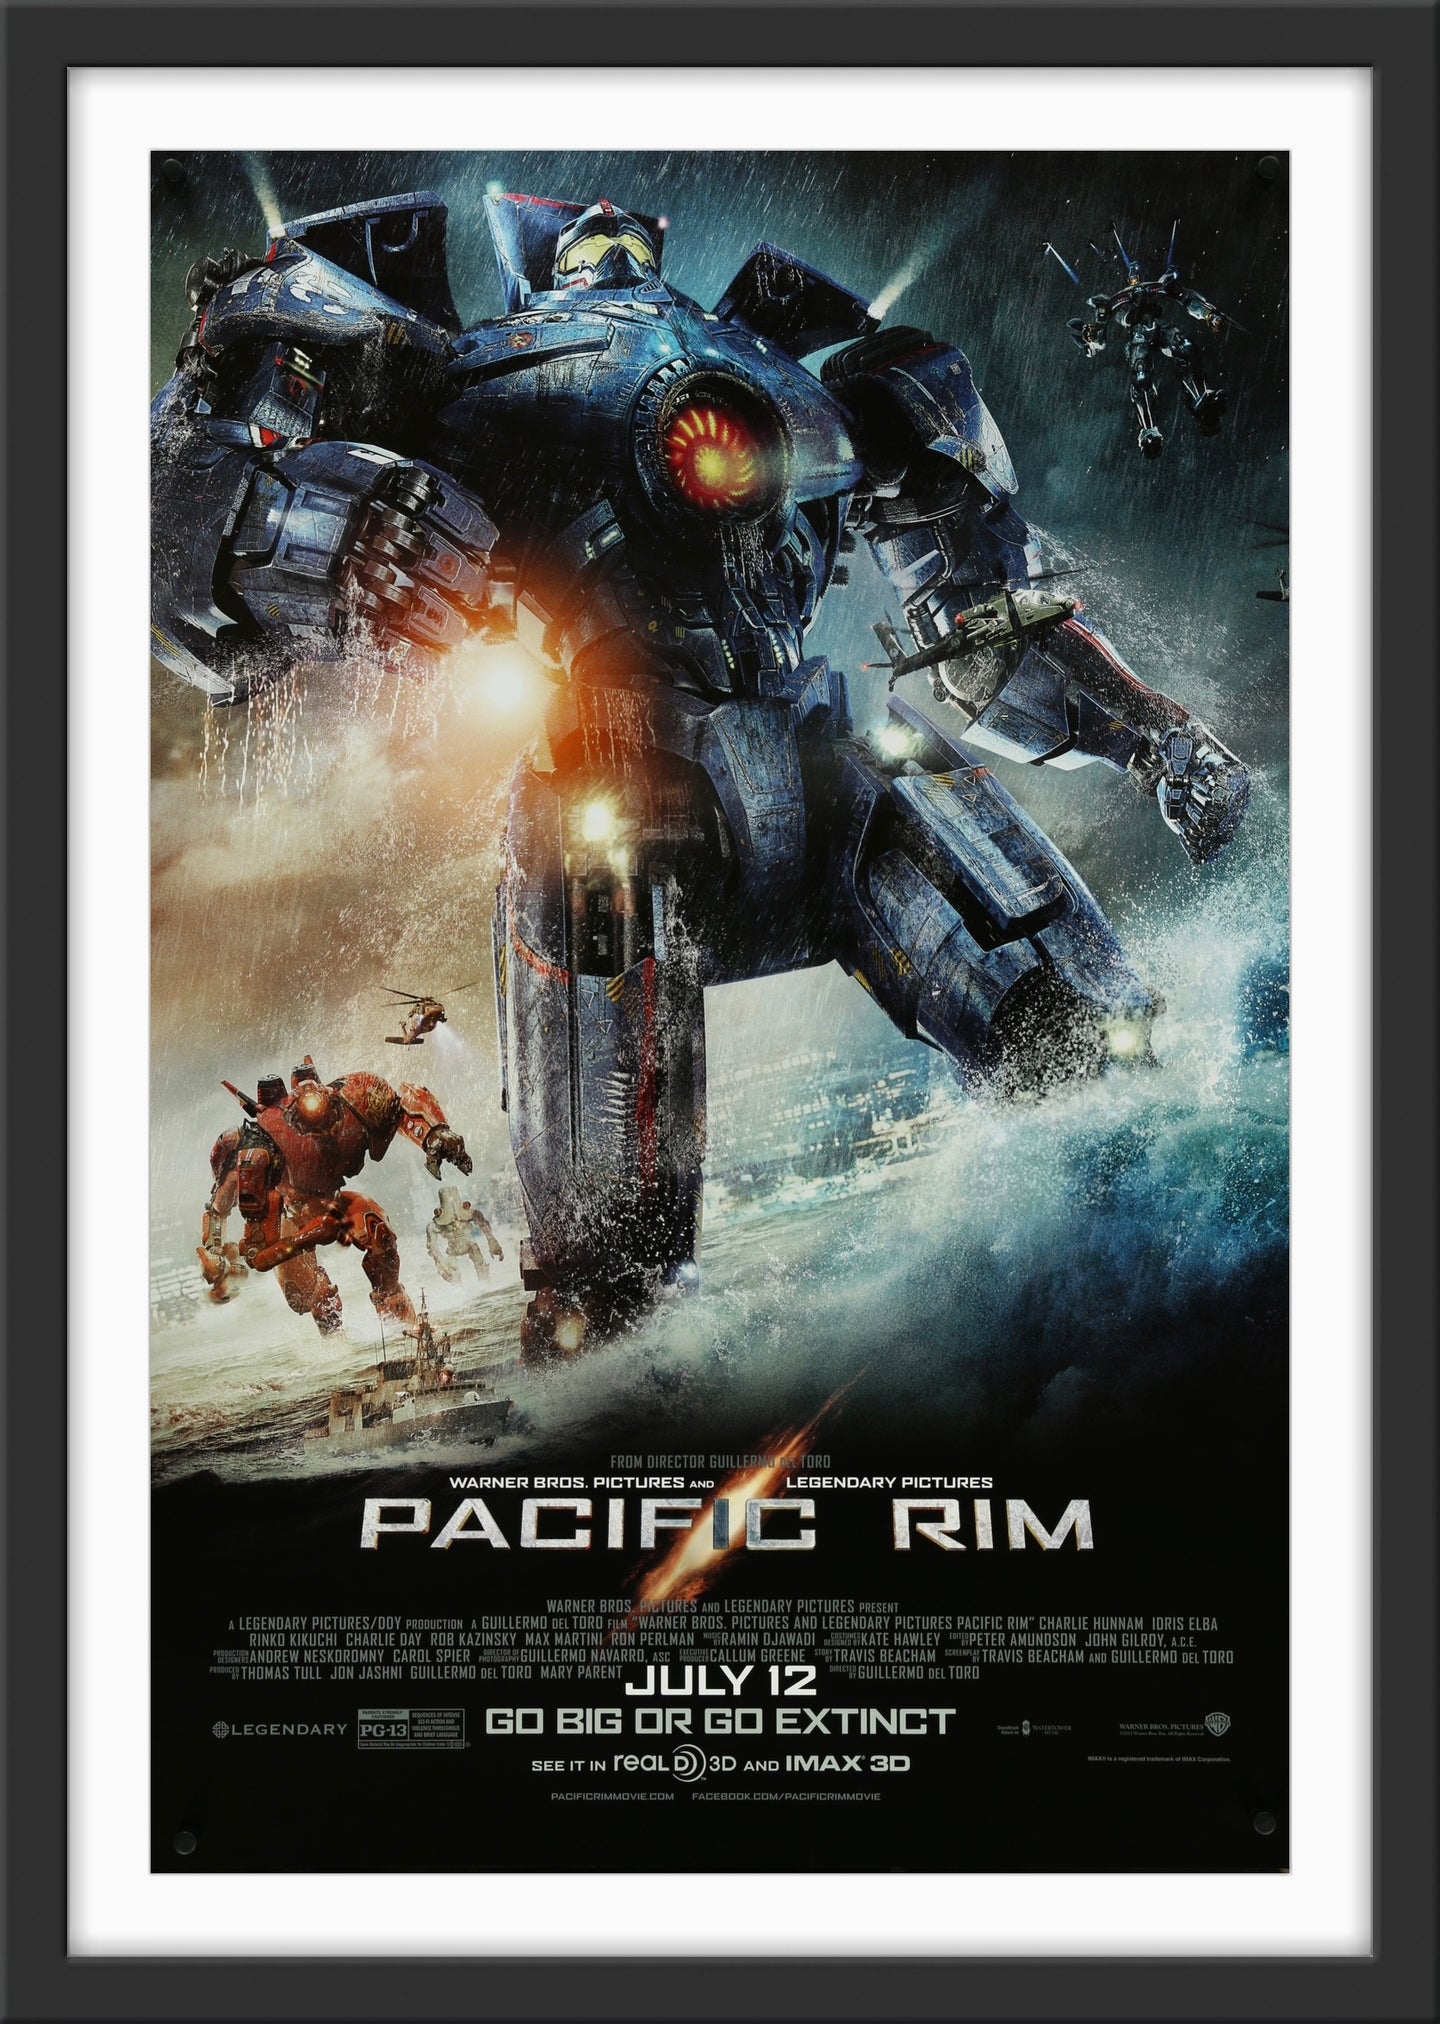 An original movie poster for the film Pacific Rim